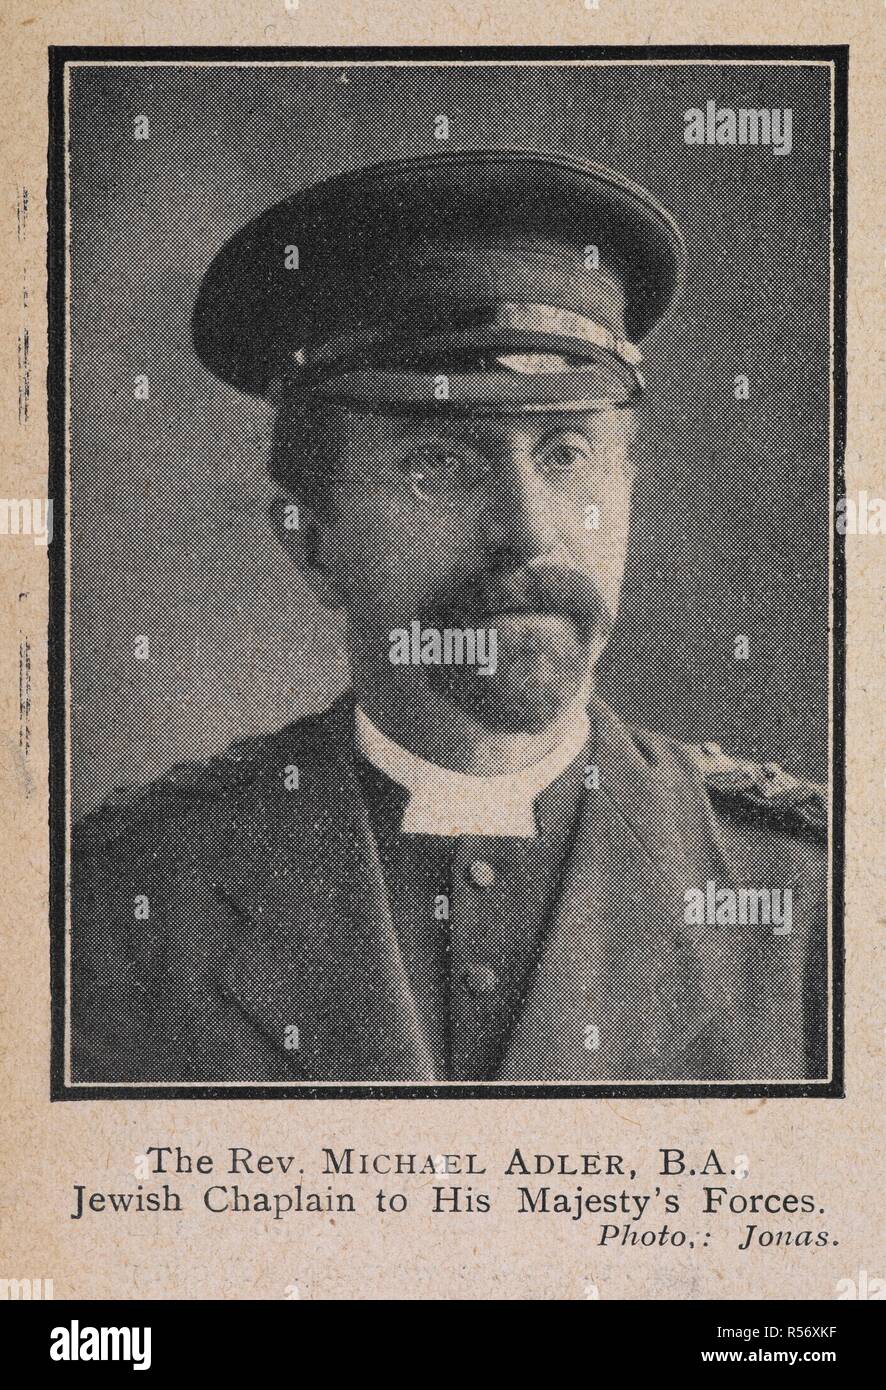 The Reverend Michael Adler (1869-1944), B.A, DSO, the senior Jewish Chaplain to his Majesty's forces during the First World War. . The Jewish World. London,. Source: The Jewish World, 30 September 1914, page 10. Author: JONAH. Stock Photo